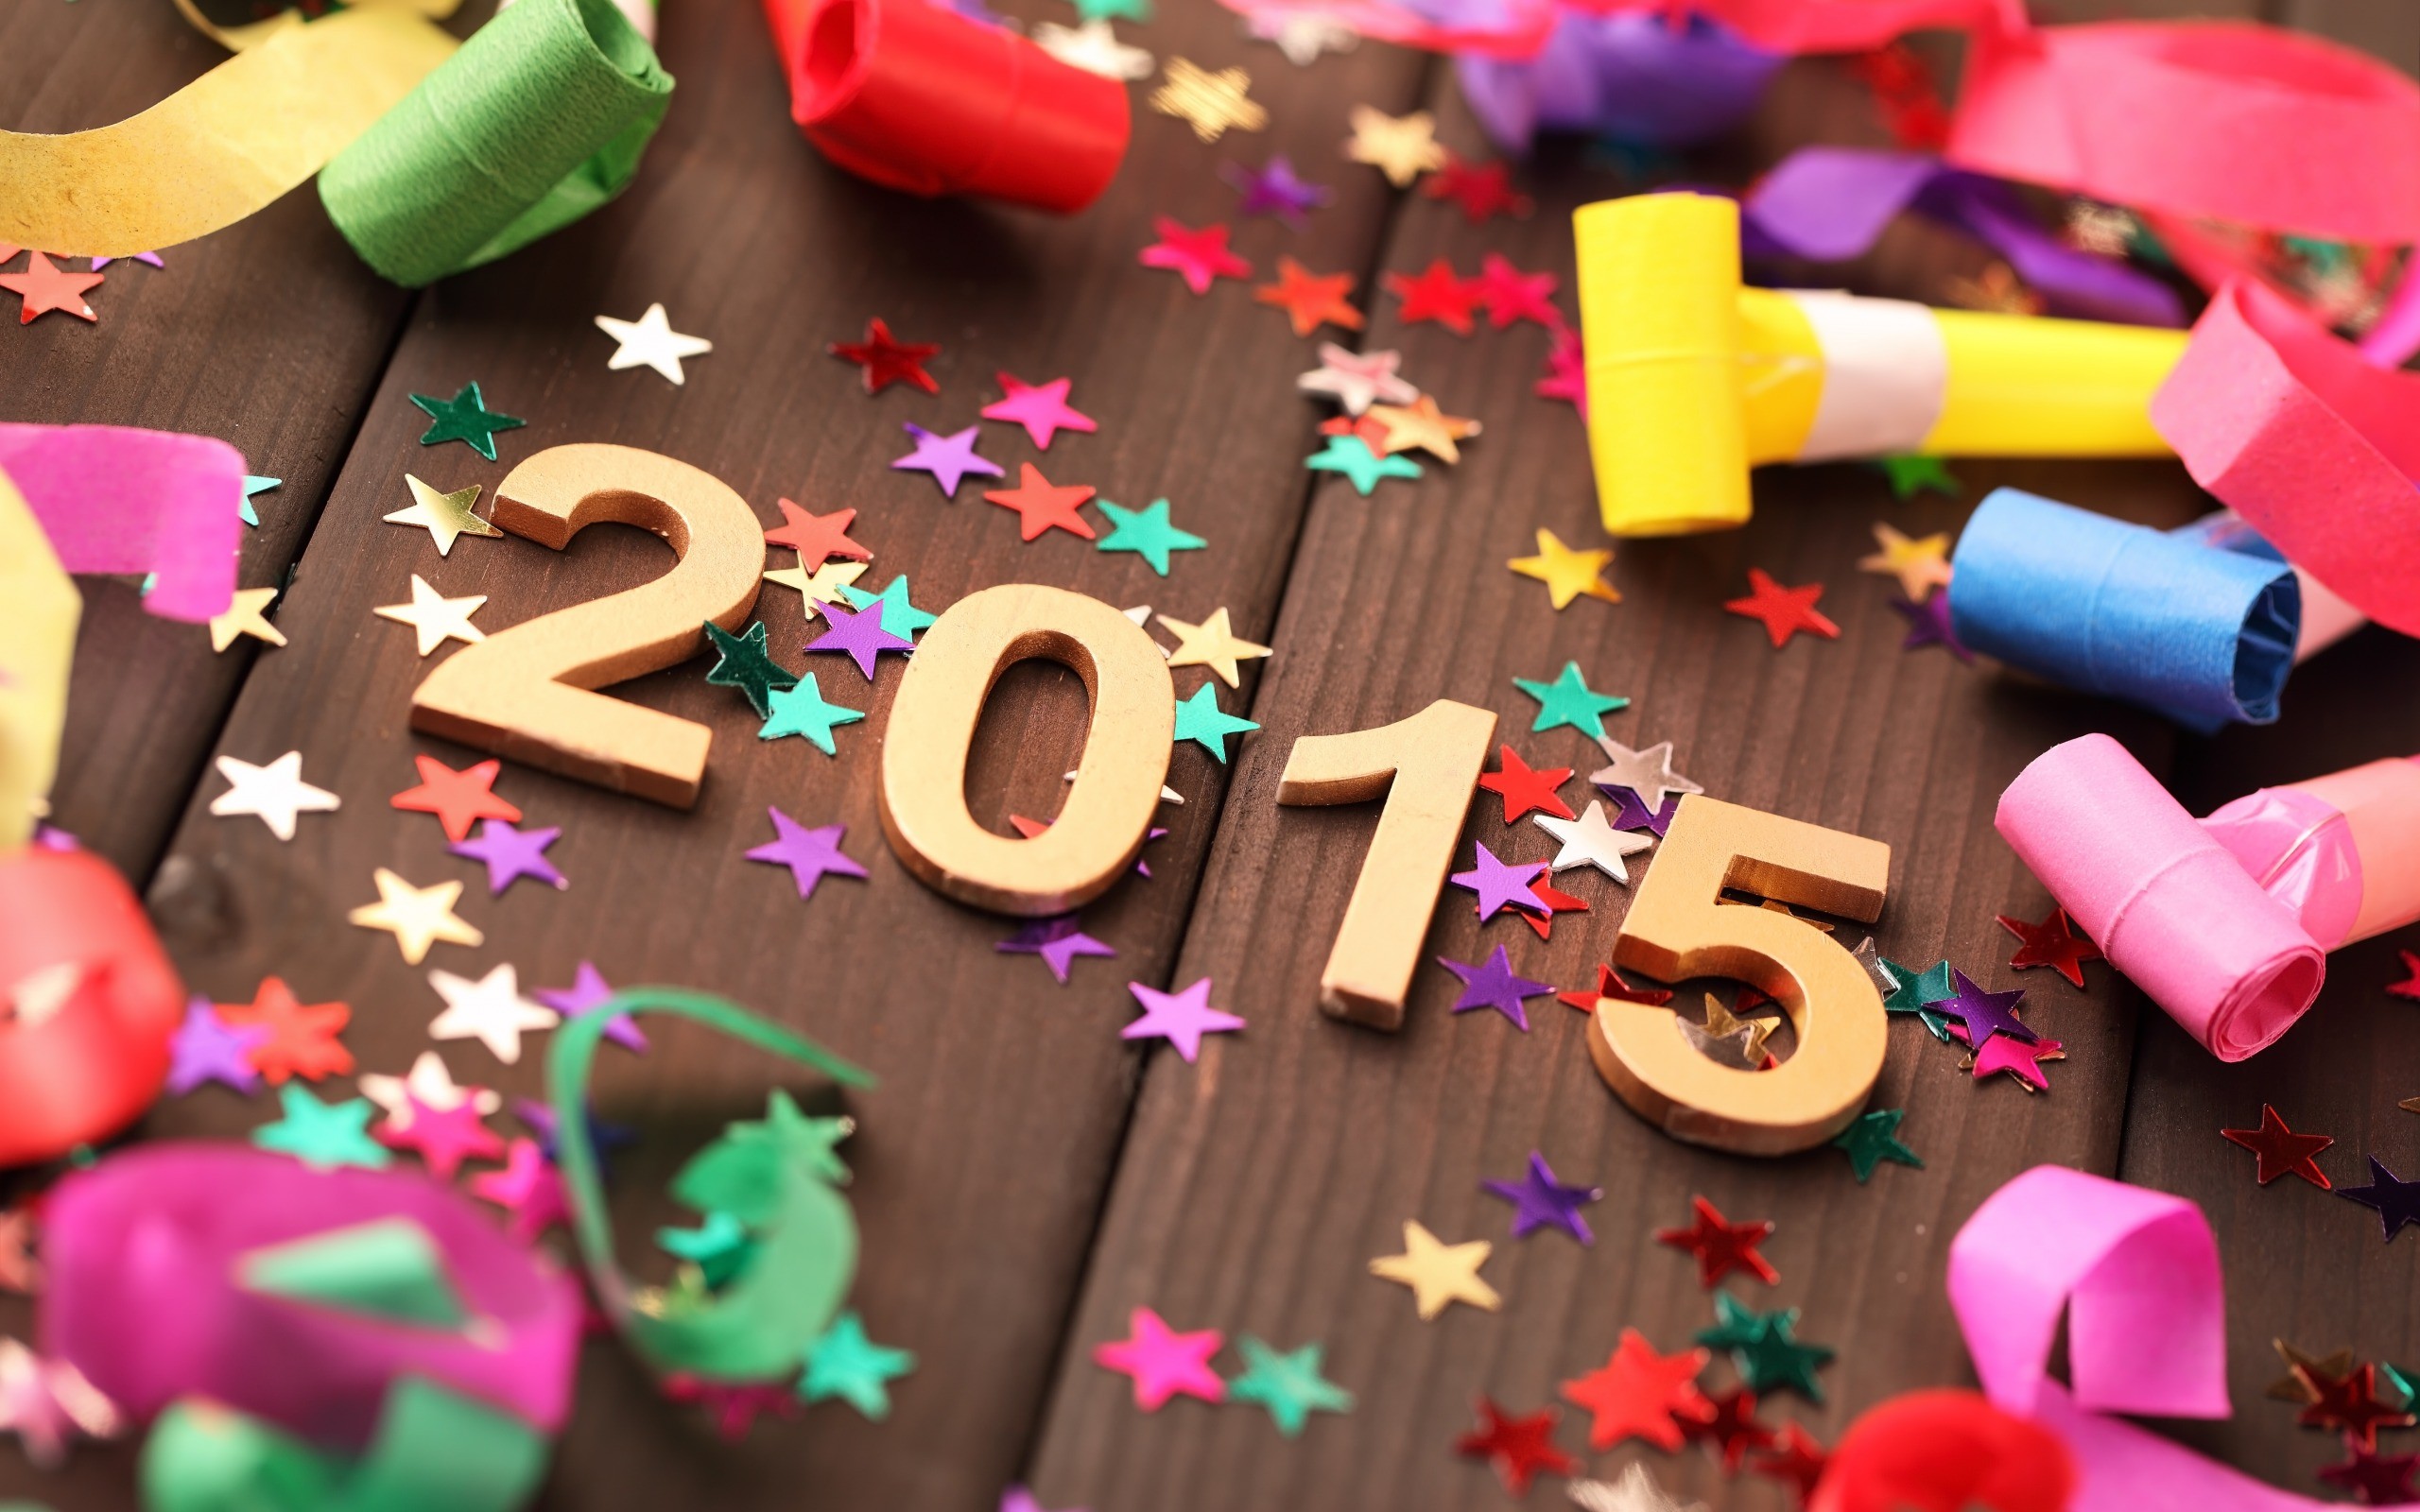 New Year 2015 Decorations Wooden Surface Stars 2560x1600